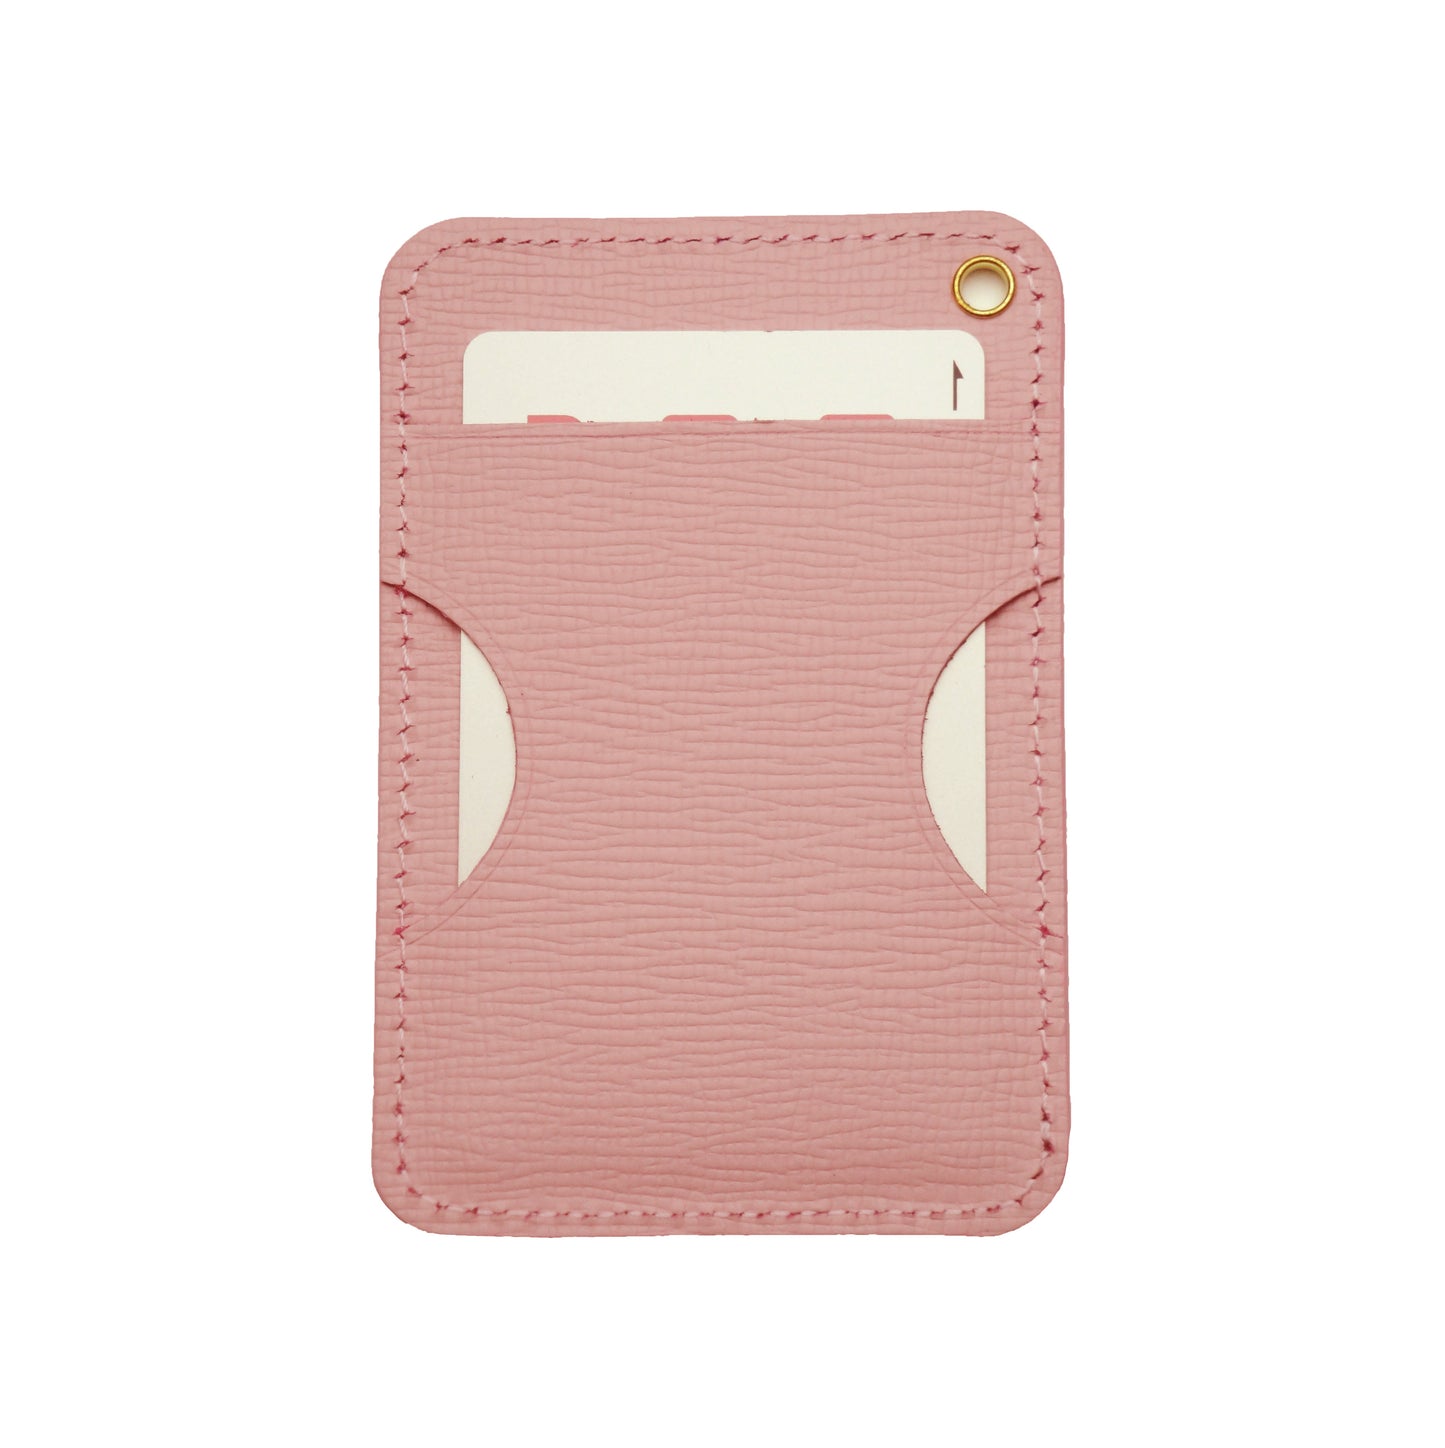 Pass case Regular case Leather Genuine leather Card case [Style-colors] Ladies cute pastel colors All 3 colors